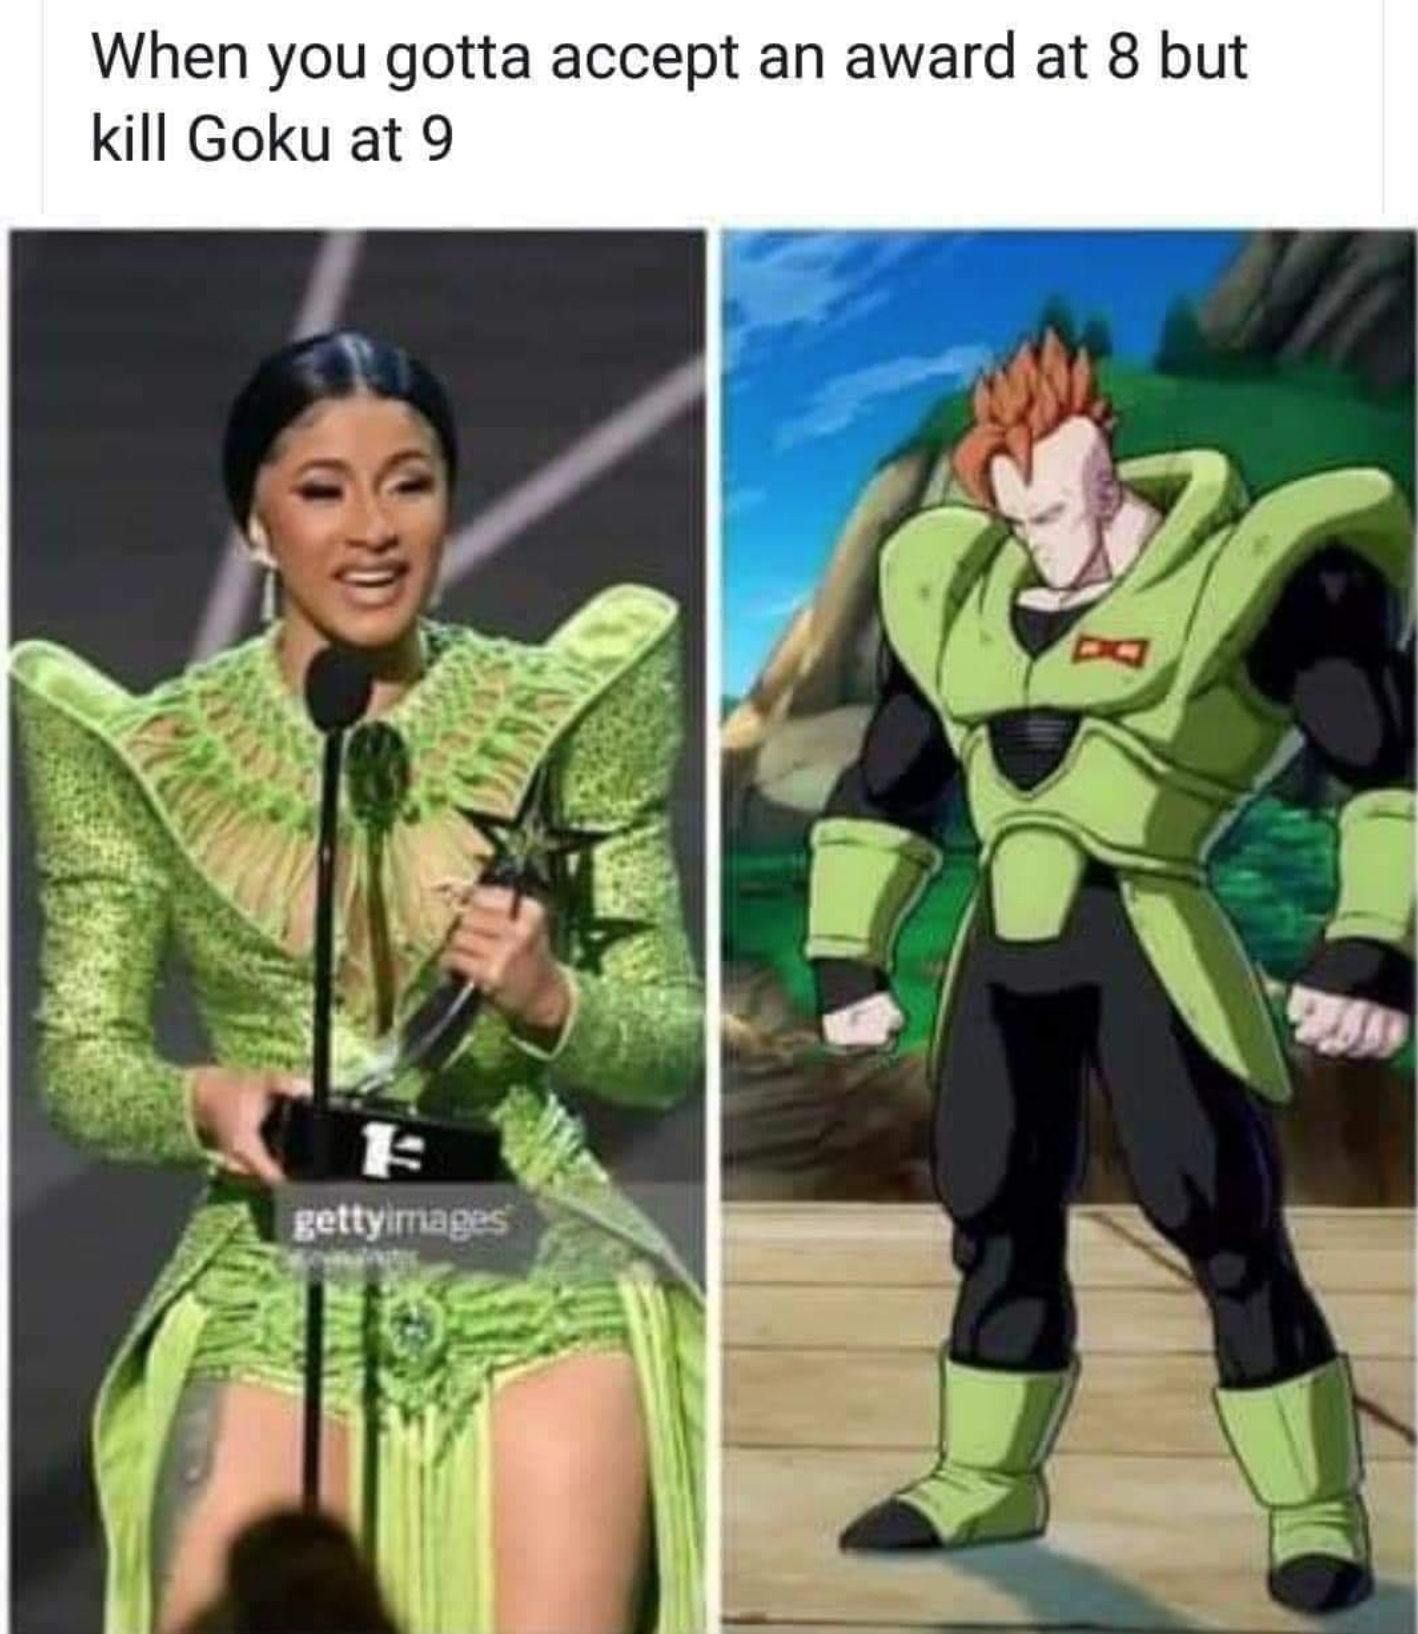 funny gaming memes - cartoon - When you gotta accept an award at 8 but kill Goku at 9 gettyimages